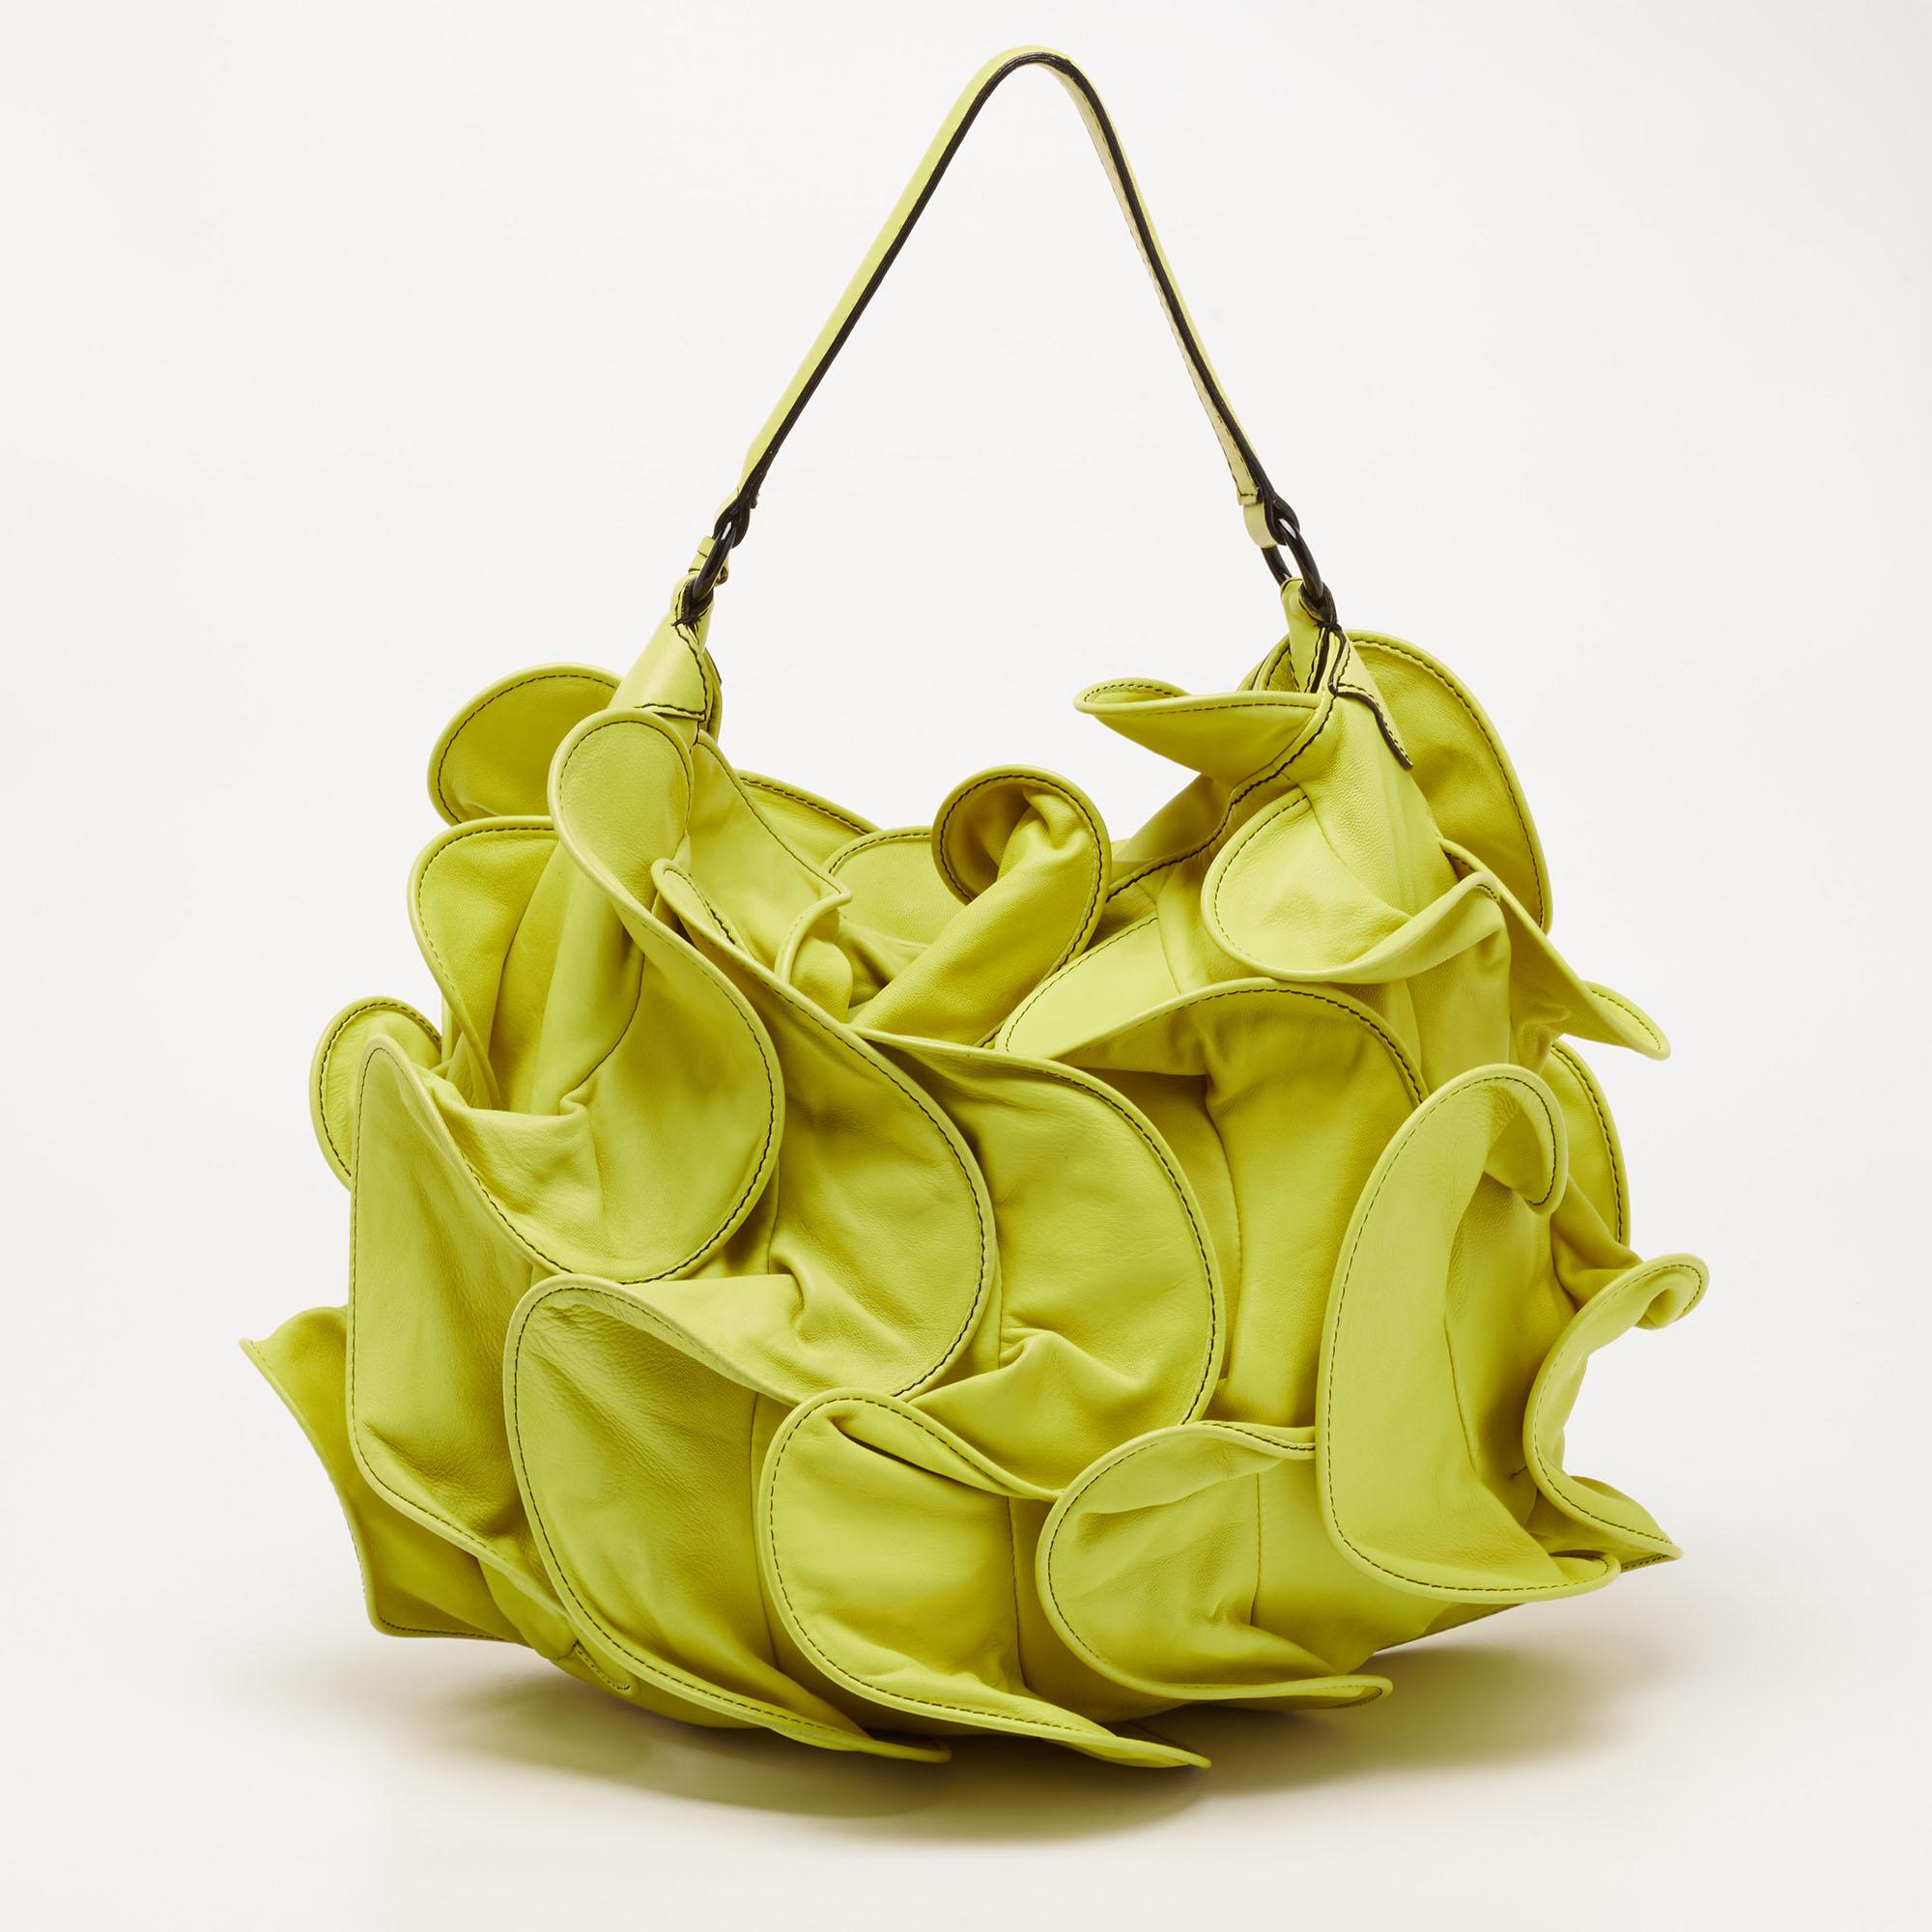 What's not to love in this hobo from Valentino! From its cheerful lemon-yellow shade to its ruffled exterior, this hobo is truly appealing and admirable. It is made from leather and highlighted with a 22 cm handle drop, black-tone fittings, and a